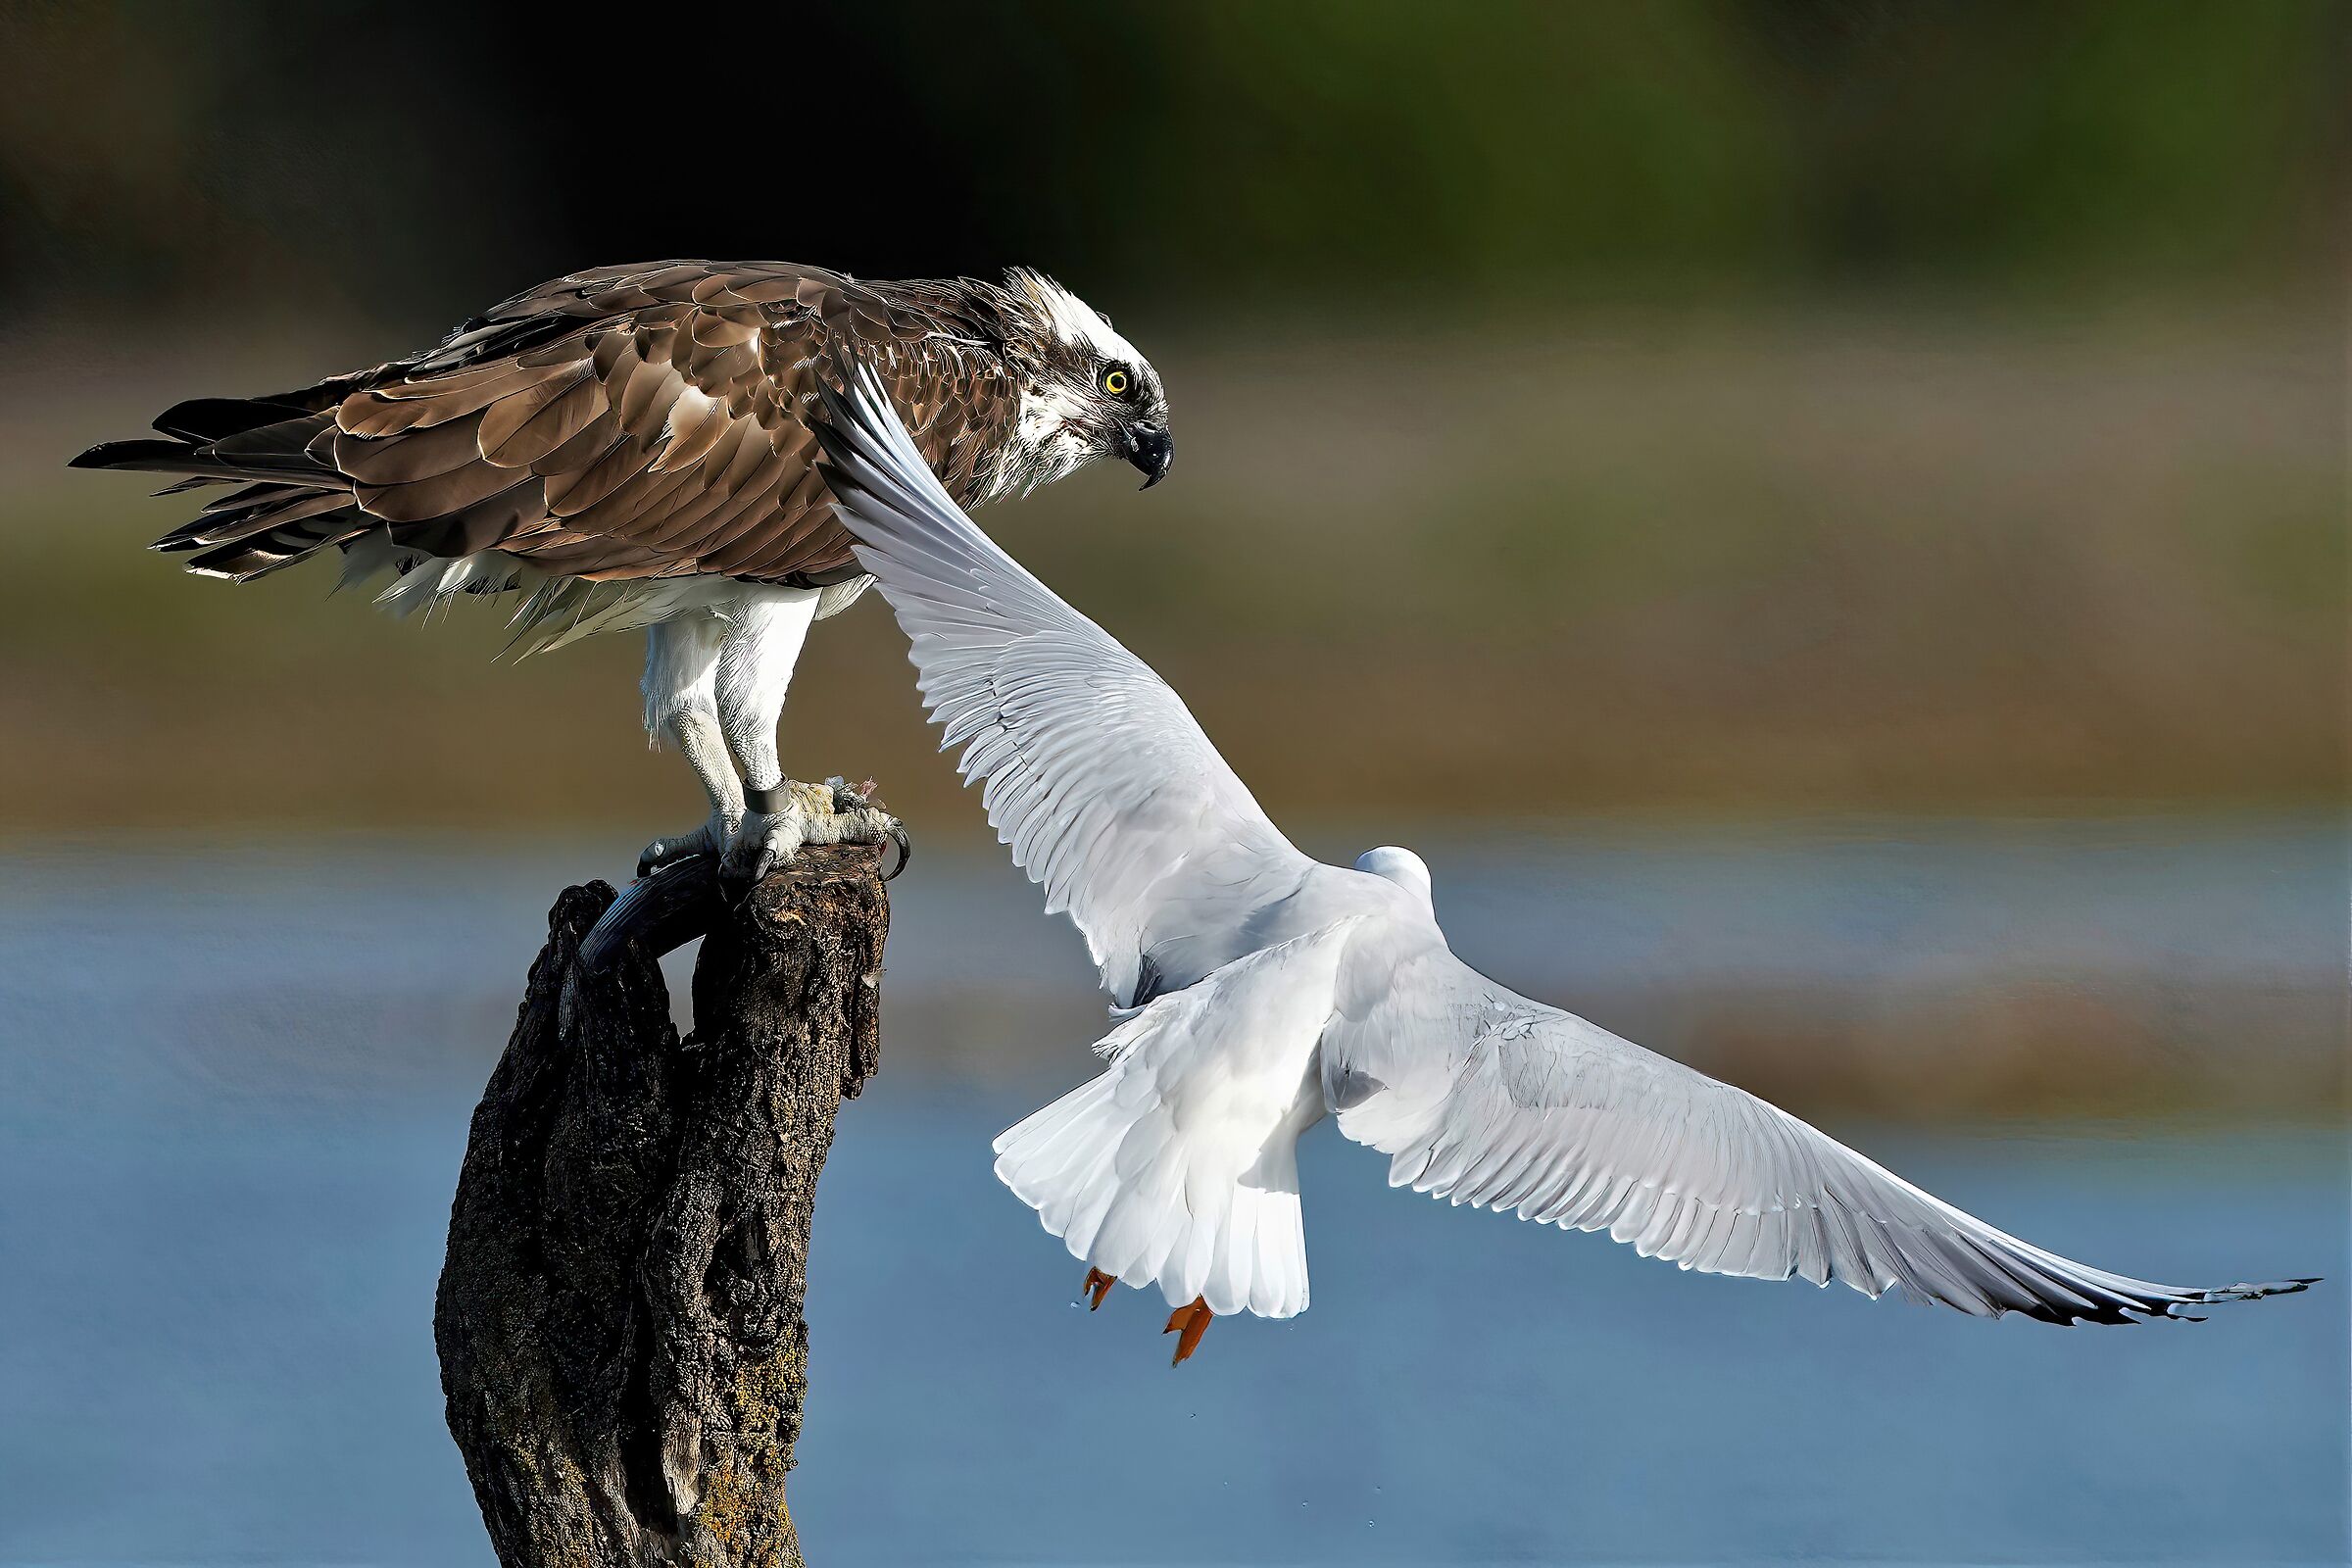 The attack of the seagull on the osprey...